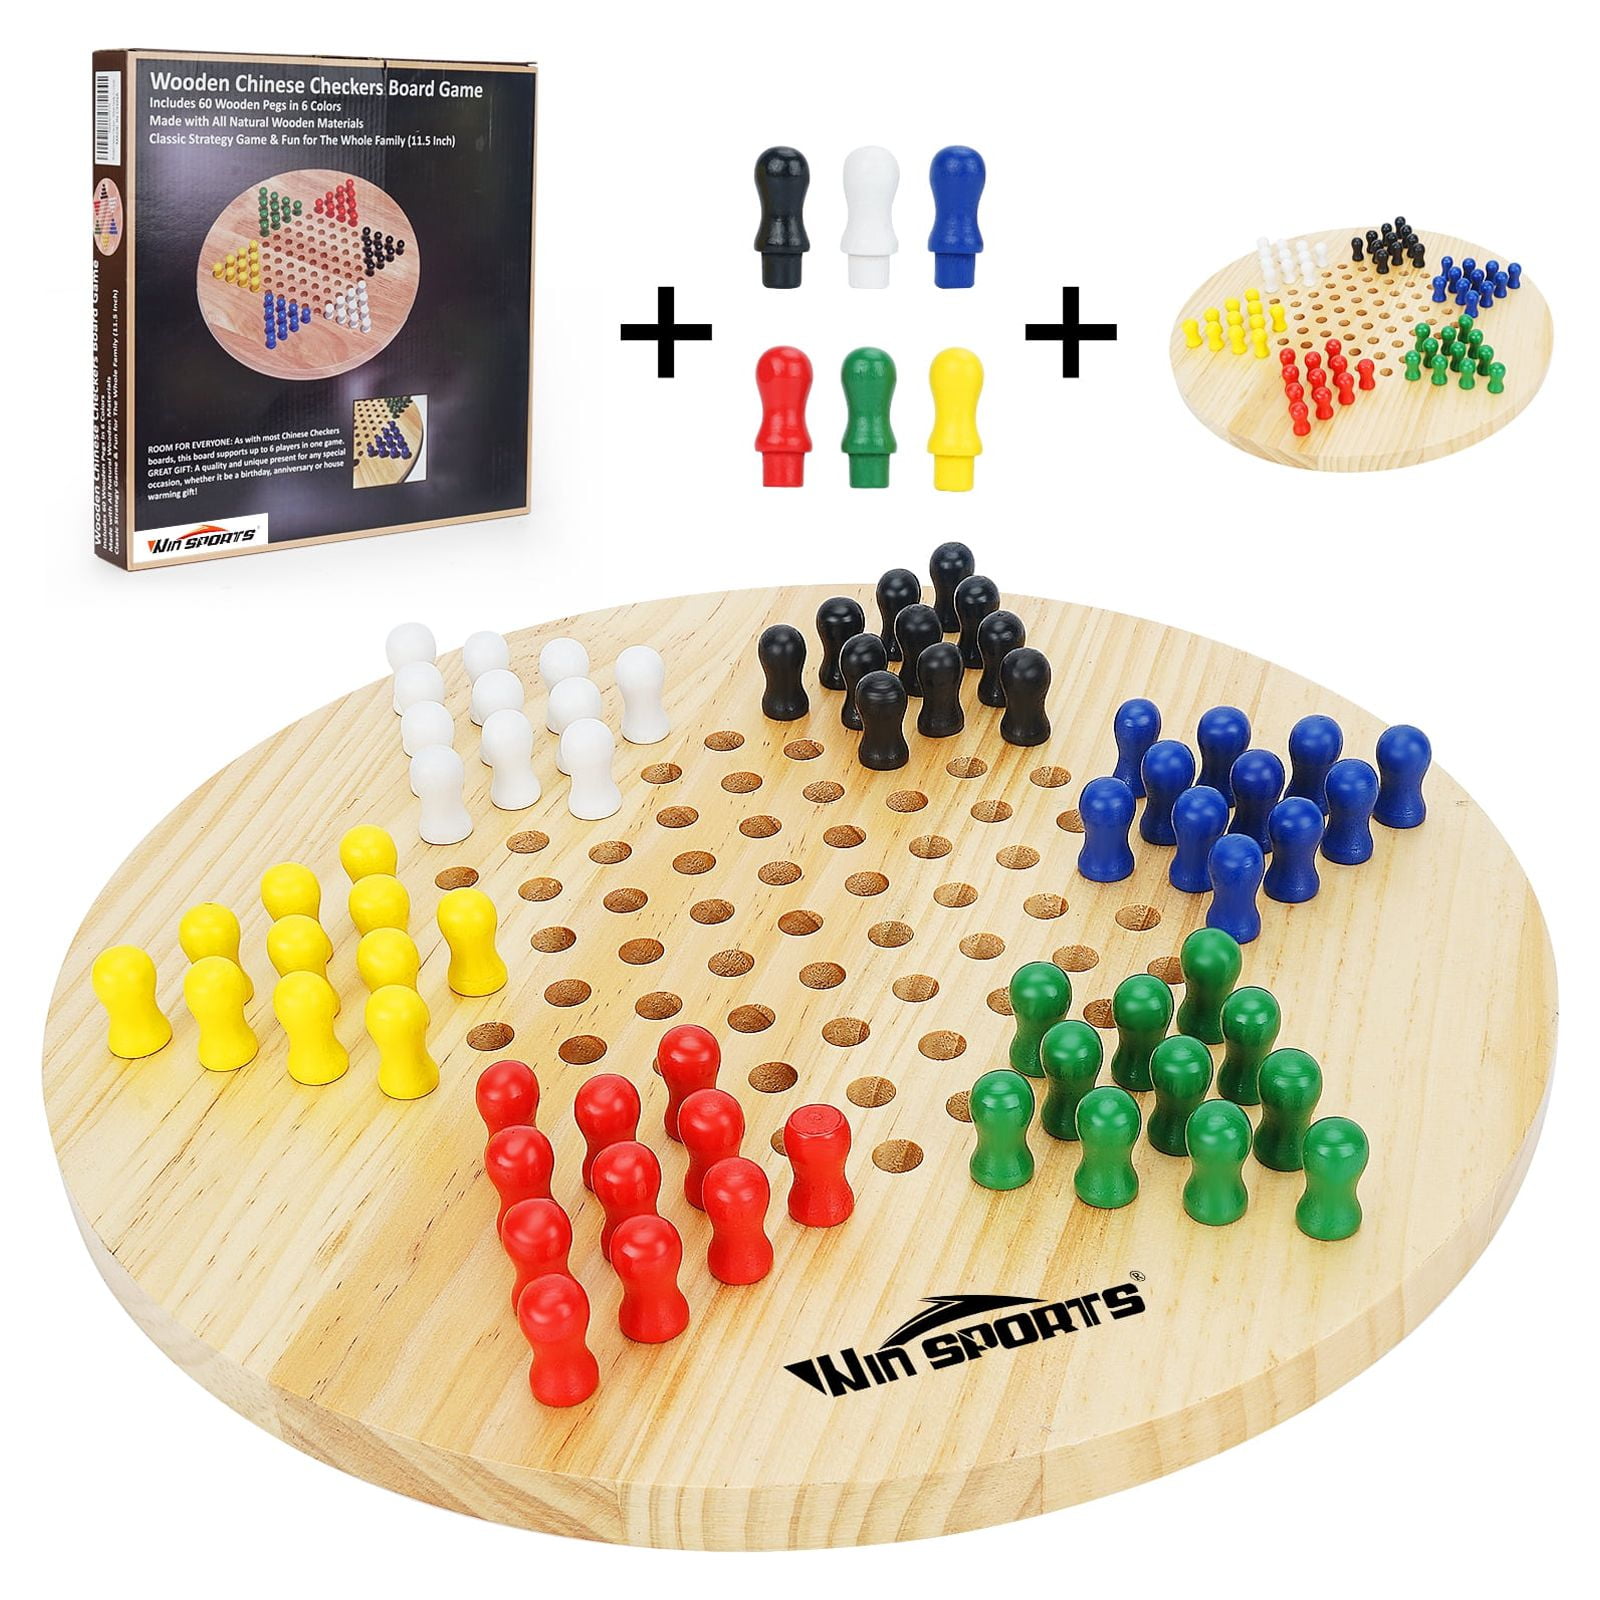  Pressman Checkers - Classic Game With Folding Board and  Interlocking Checkers, 2 Players : Toys & Games